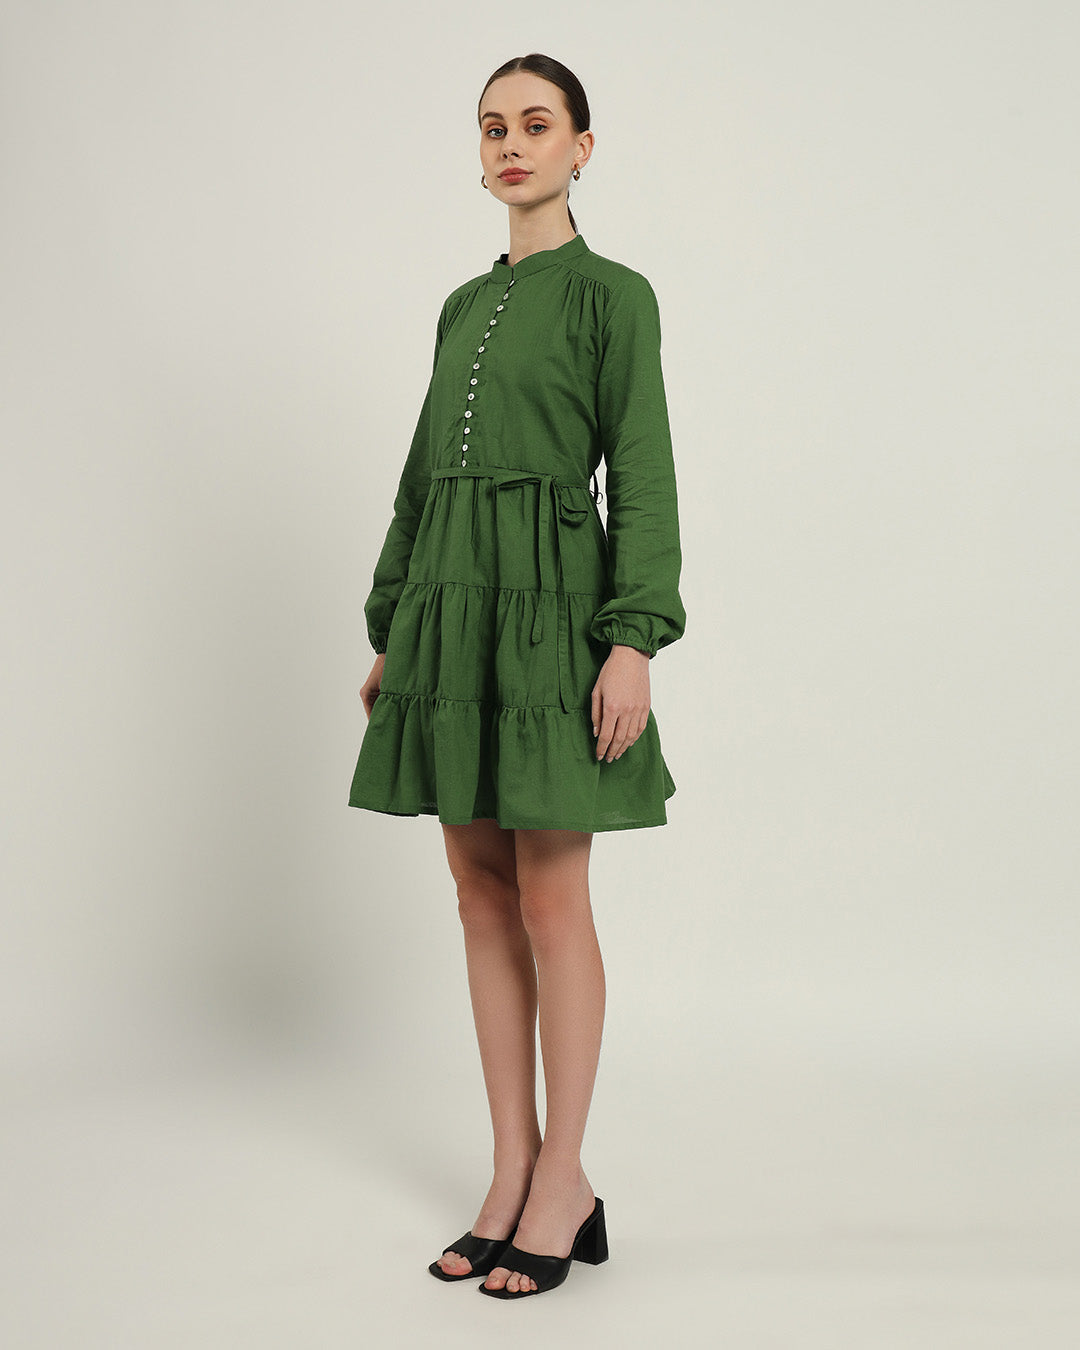 The Ely Emerald Cotton Dress